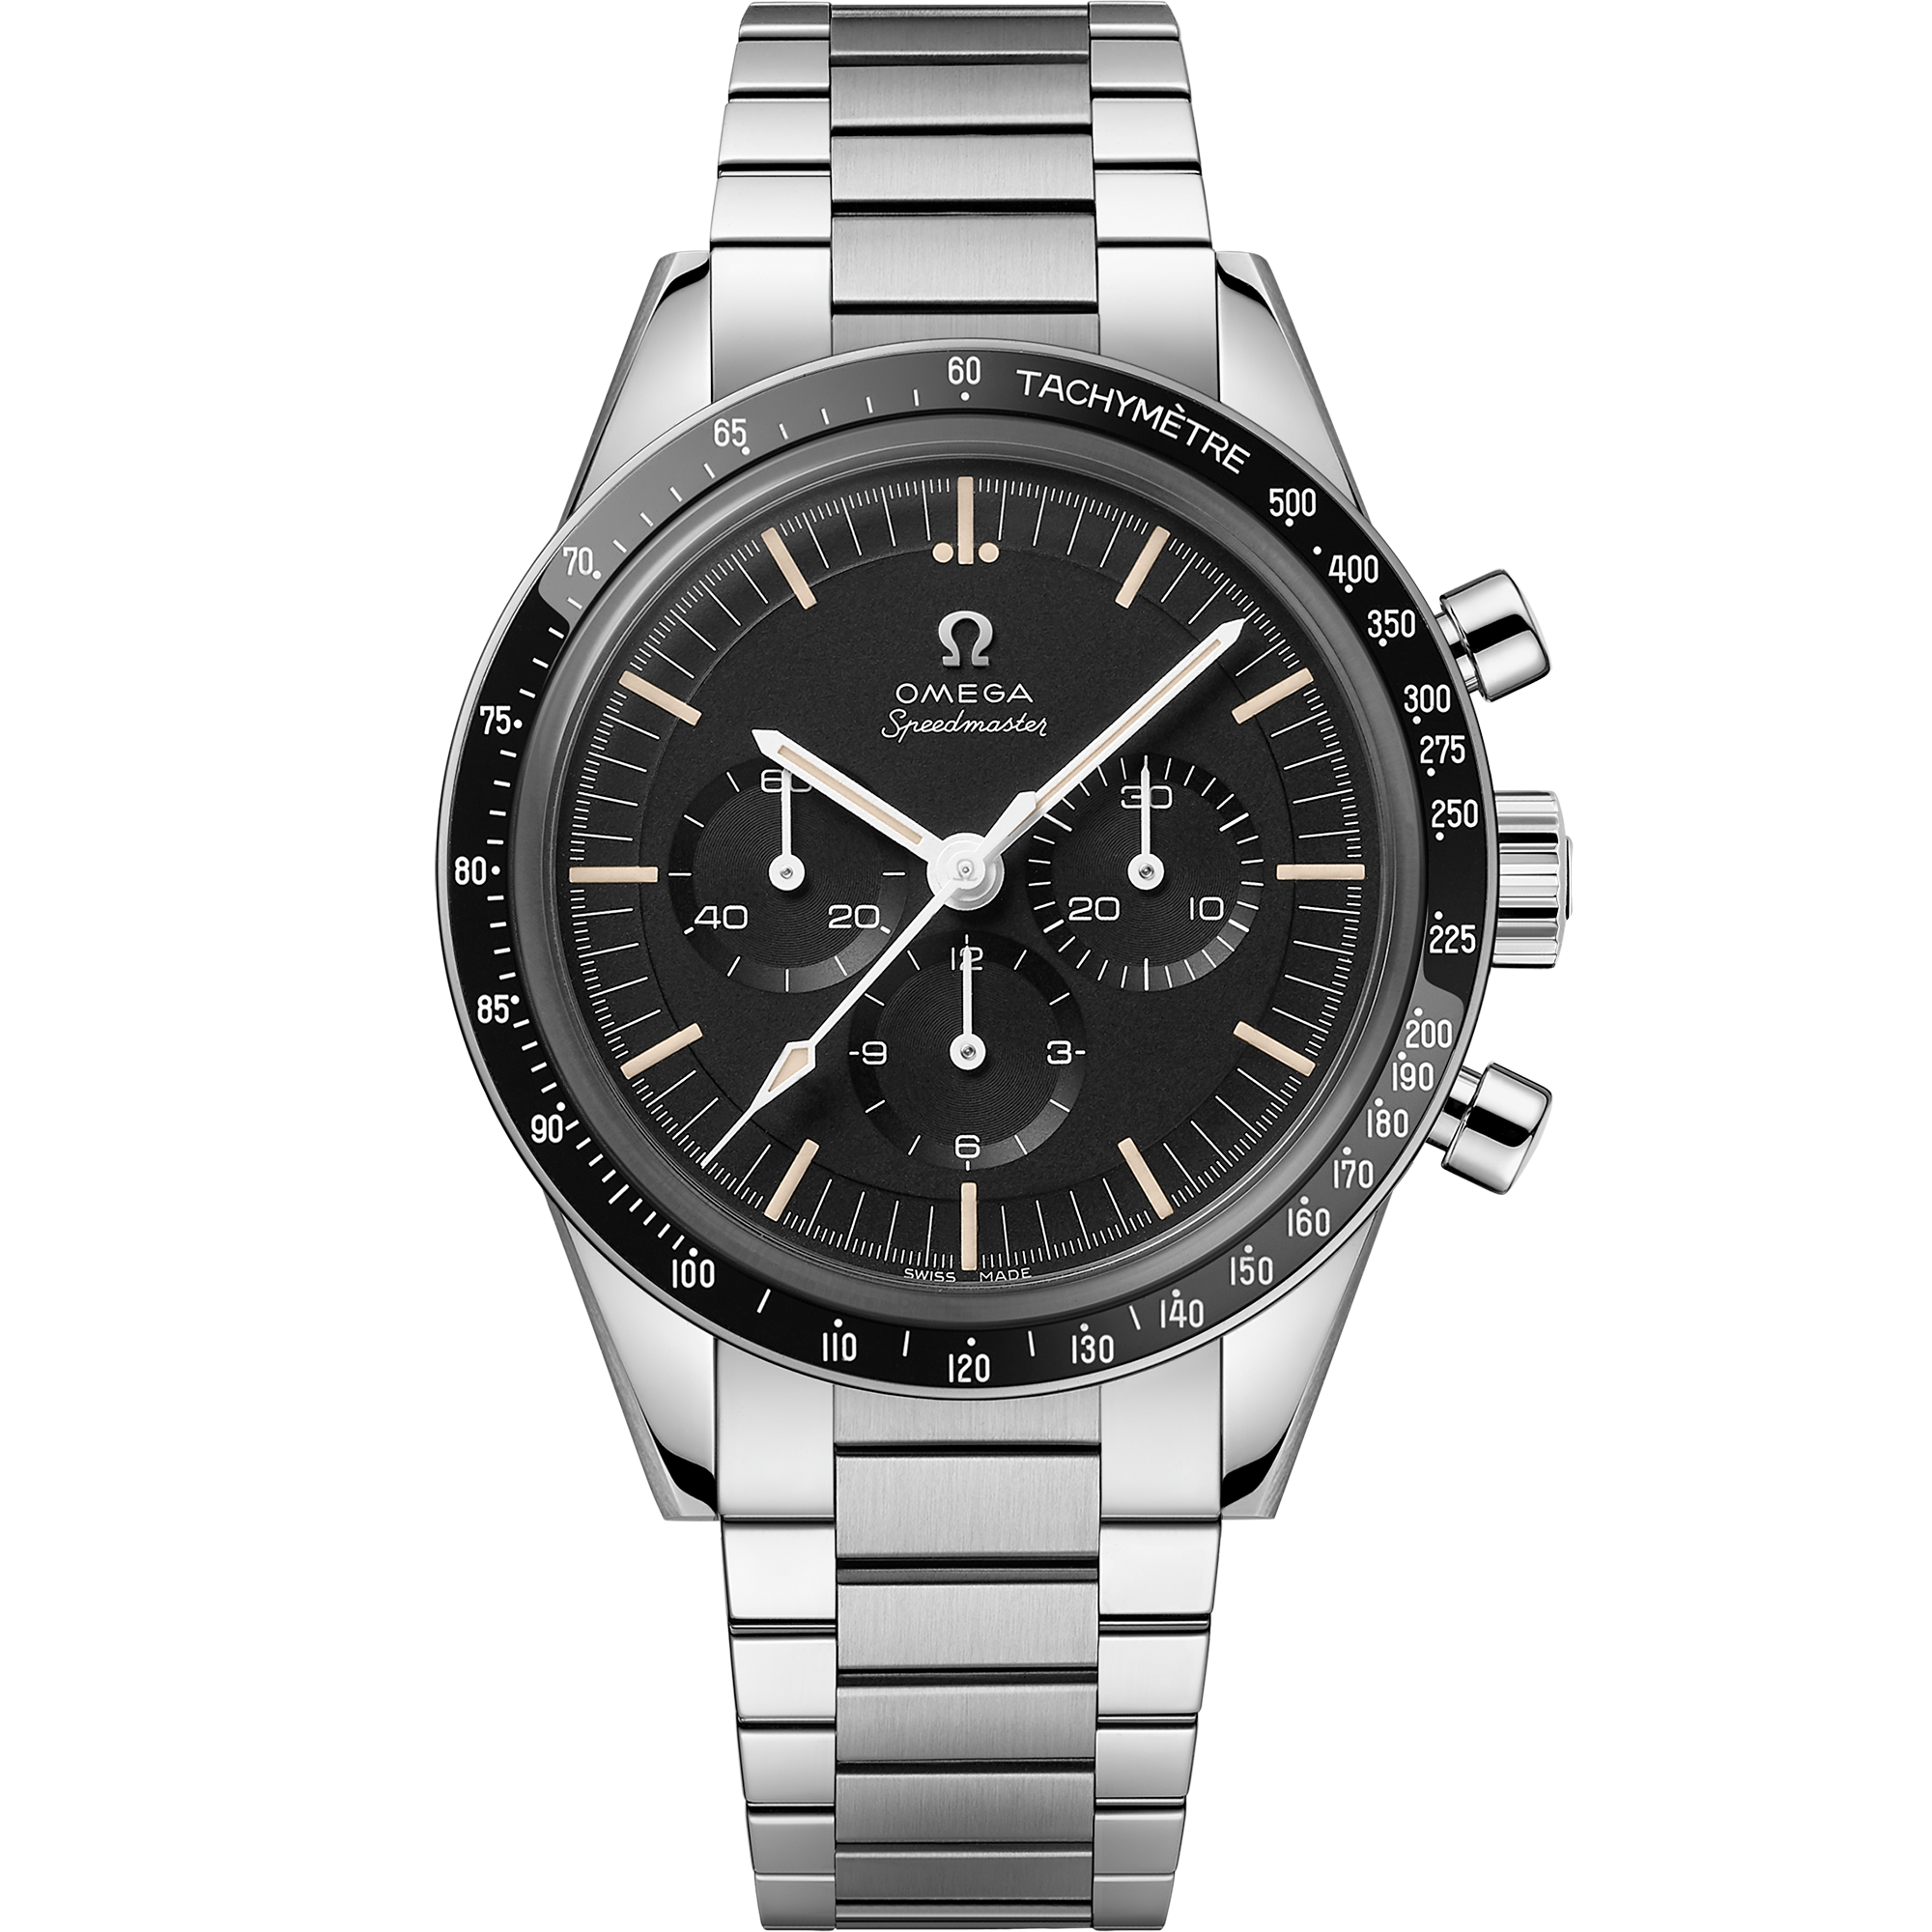 Speedmaster Watches: Chronographs for Precision u0026 Style | OMEGA US®